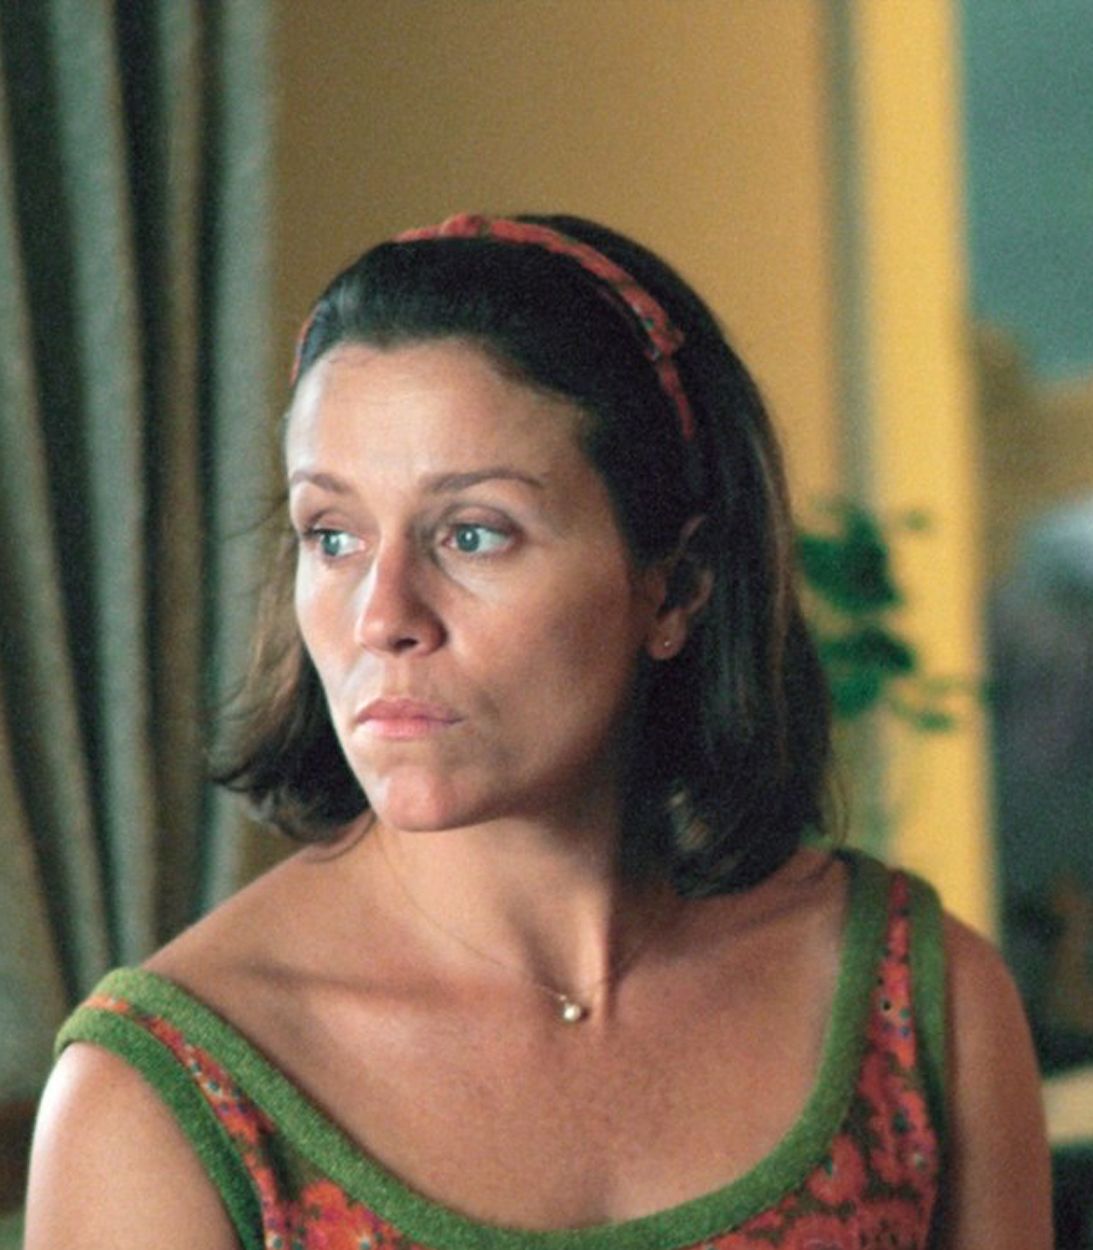 Frances McDormand in Almost Famous vertical